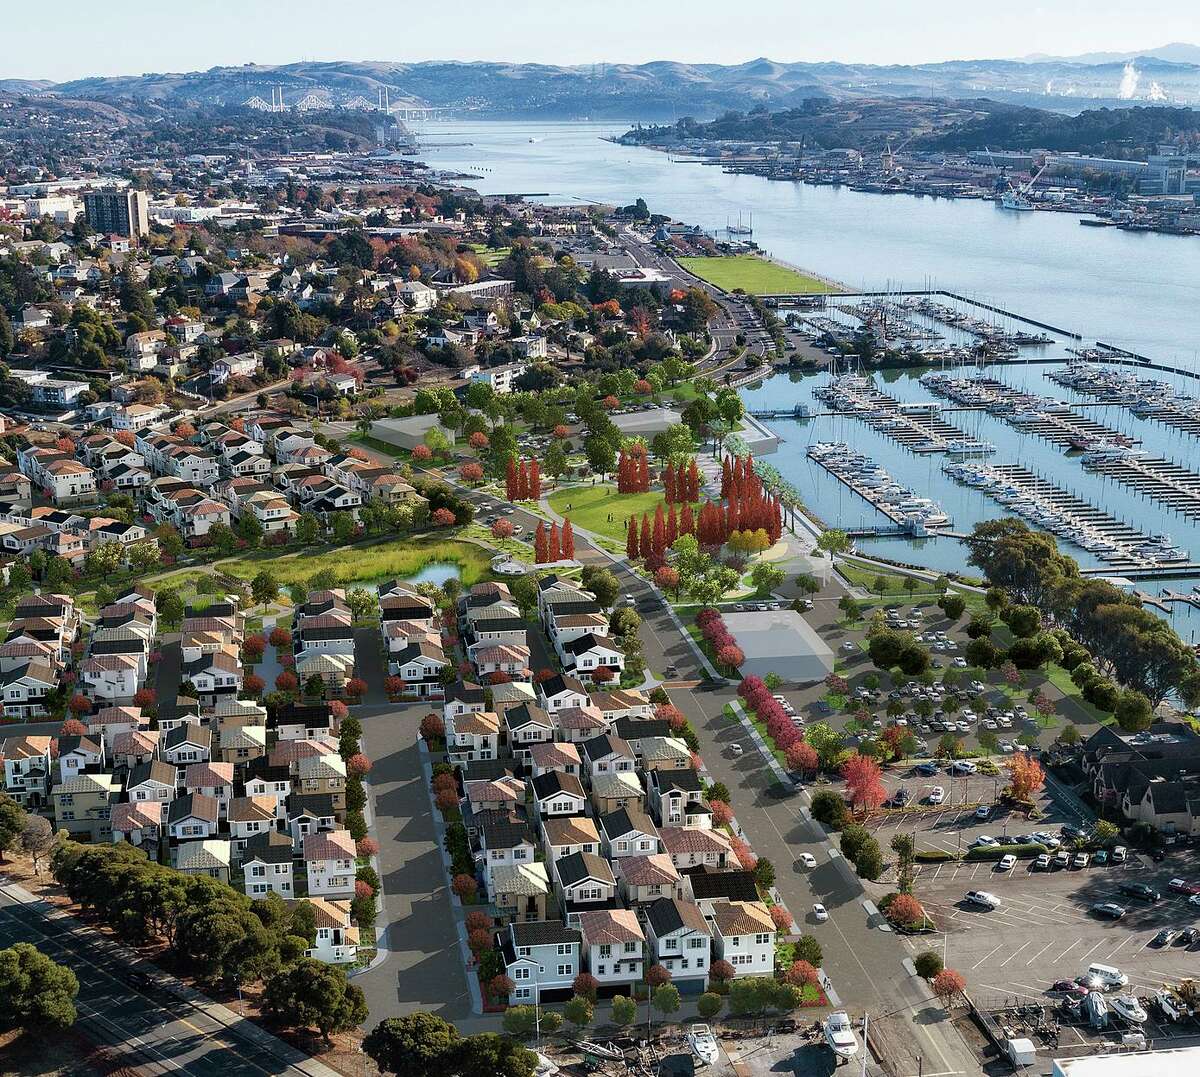 Architect Jennifer Mastro worked on the Mariner’s Cove project in Vallejo, a 7.5-acre community of 175 single-family homes and a pair of parks near the waterfront. Construction of Mariner's Cove is set to begin in 2021.